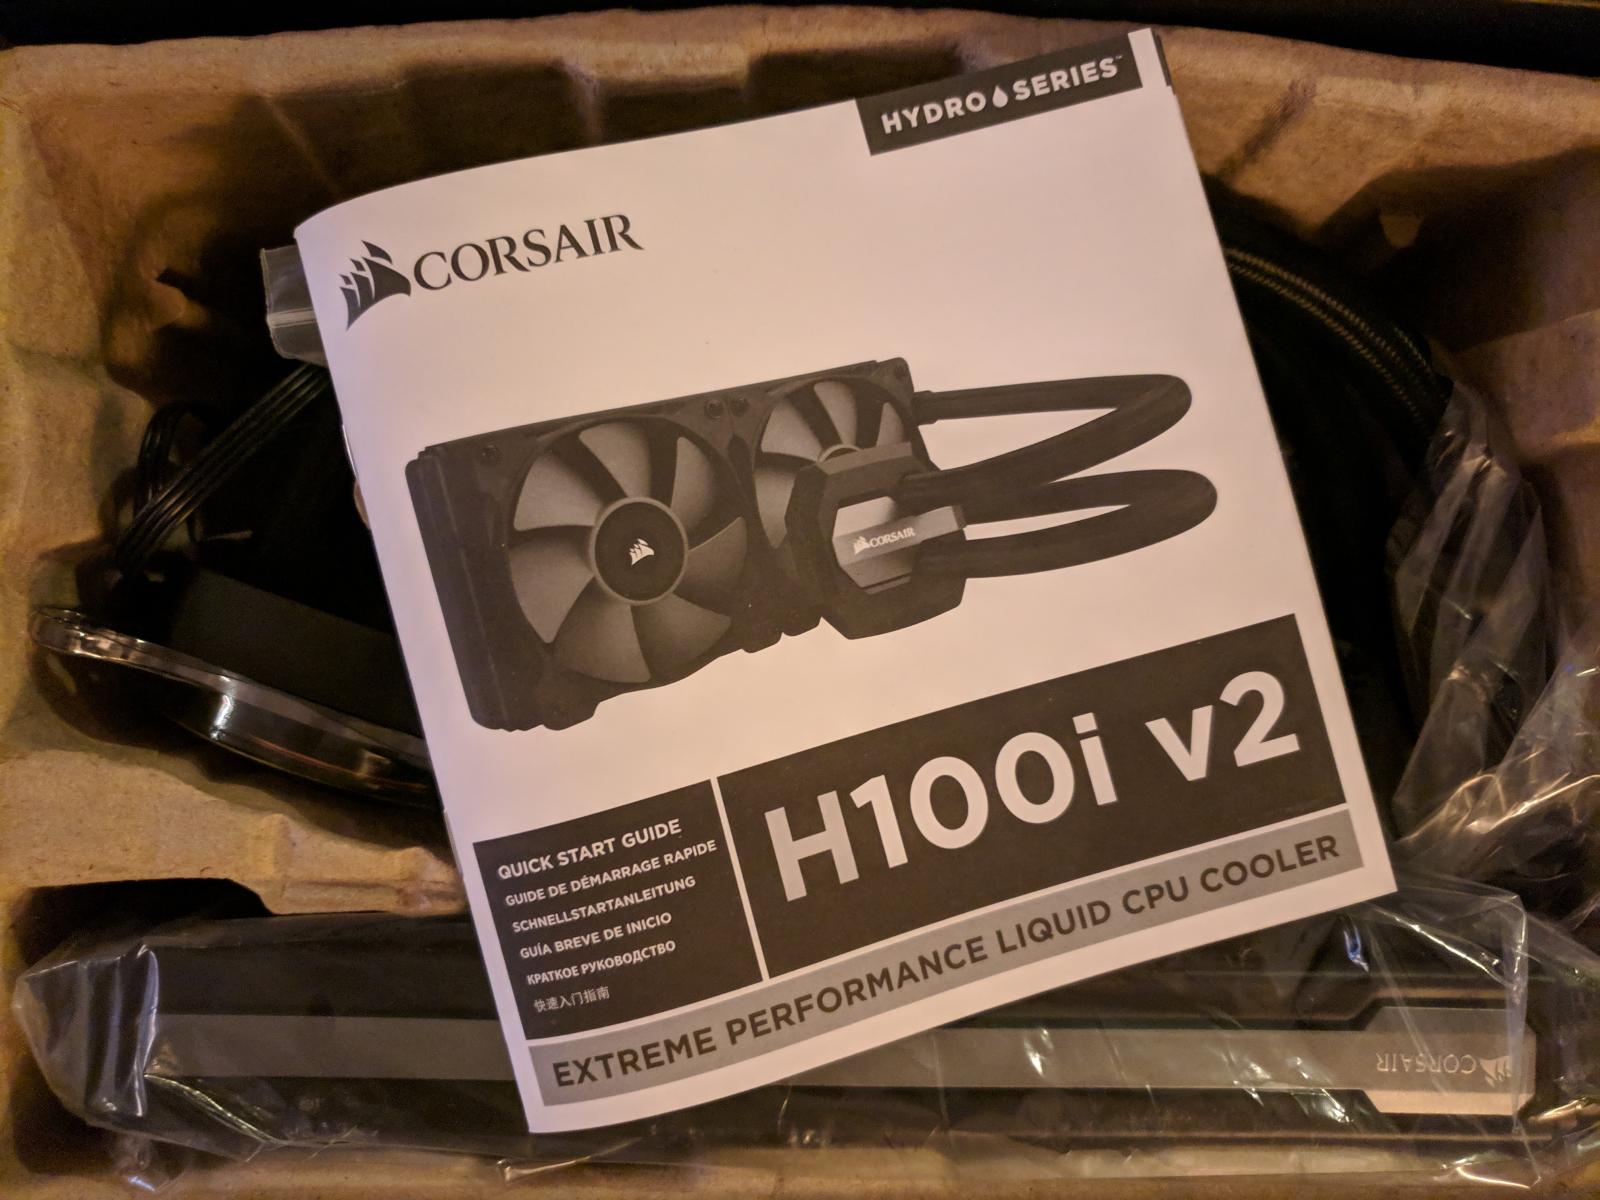 For sale Corsair Hydro Series H100i v2 Extreme Performance Liquid CPU Cooler